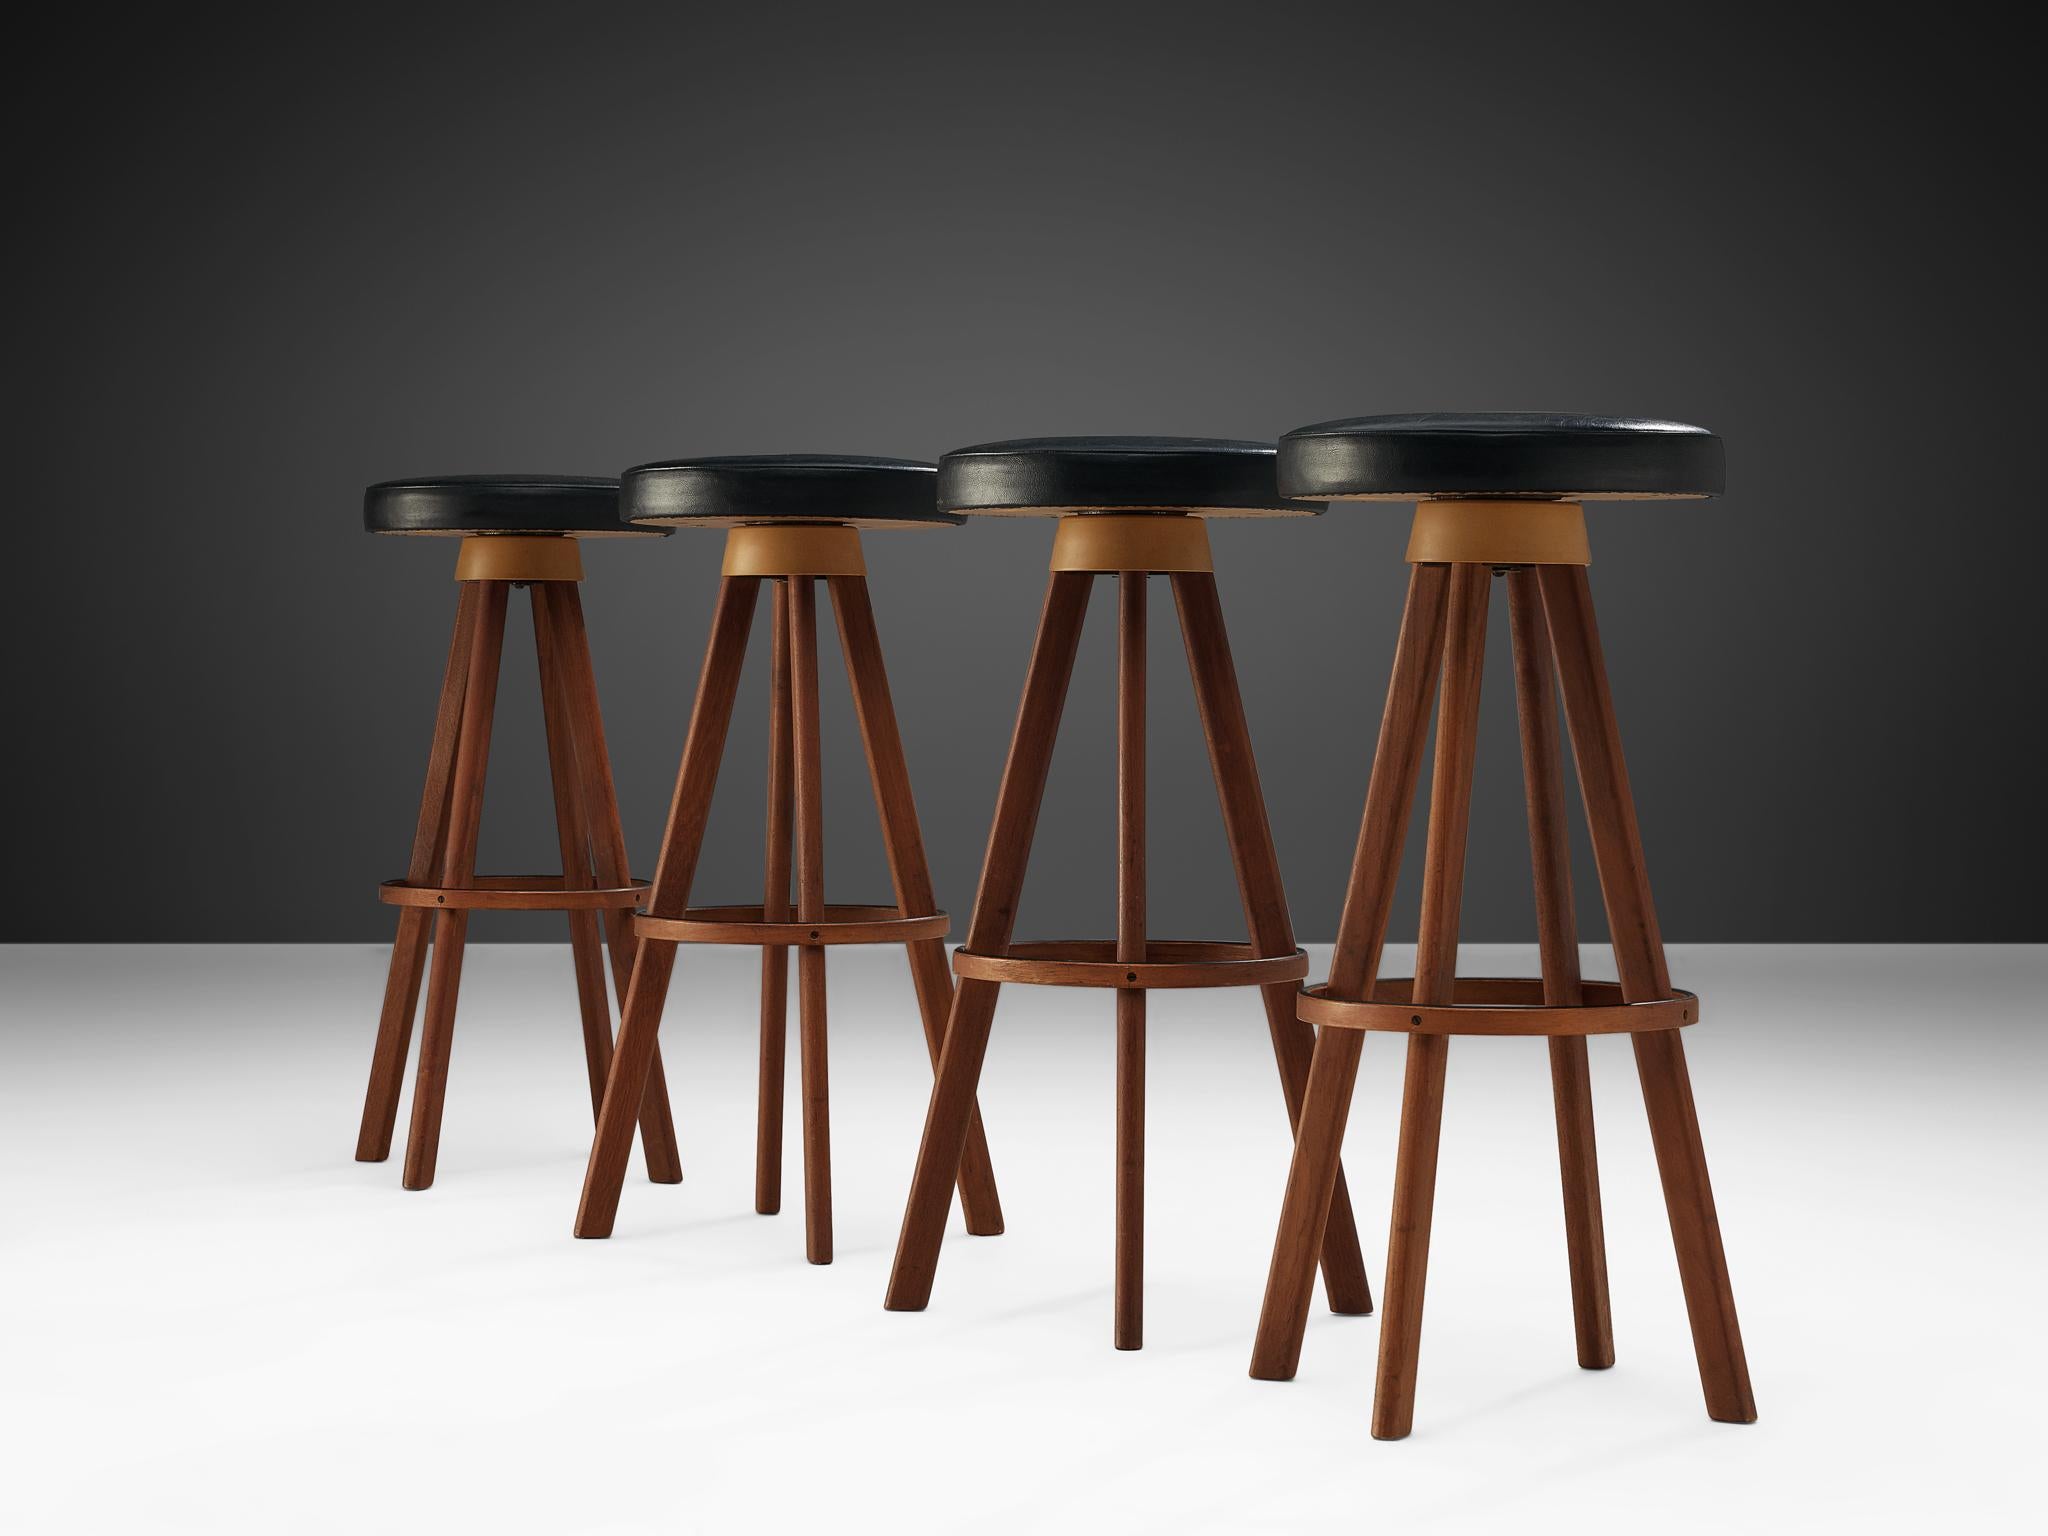 Hans Olsen, bar stools manufactured by Frem Røjle, teak and faux leather, Denmark, 1960s.

These bar stools are very solid and modest in their appearance. The frame of the stools, including the ring that connects the four legs is executed in teak.